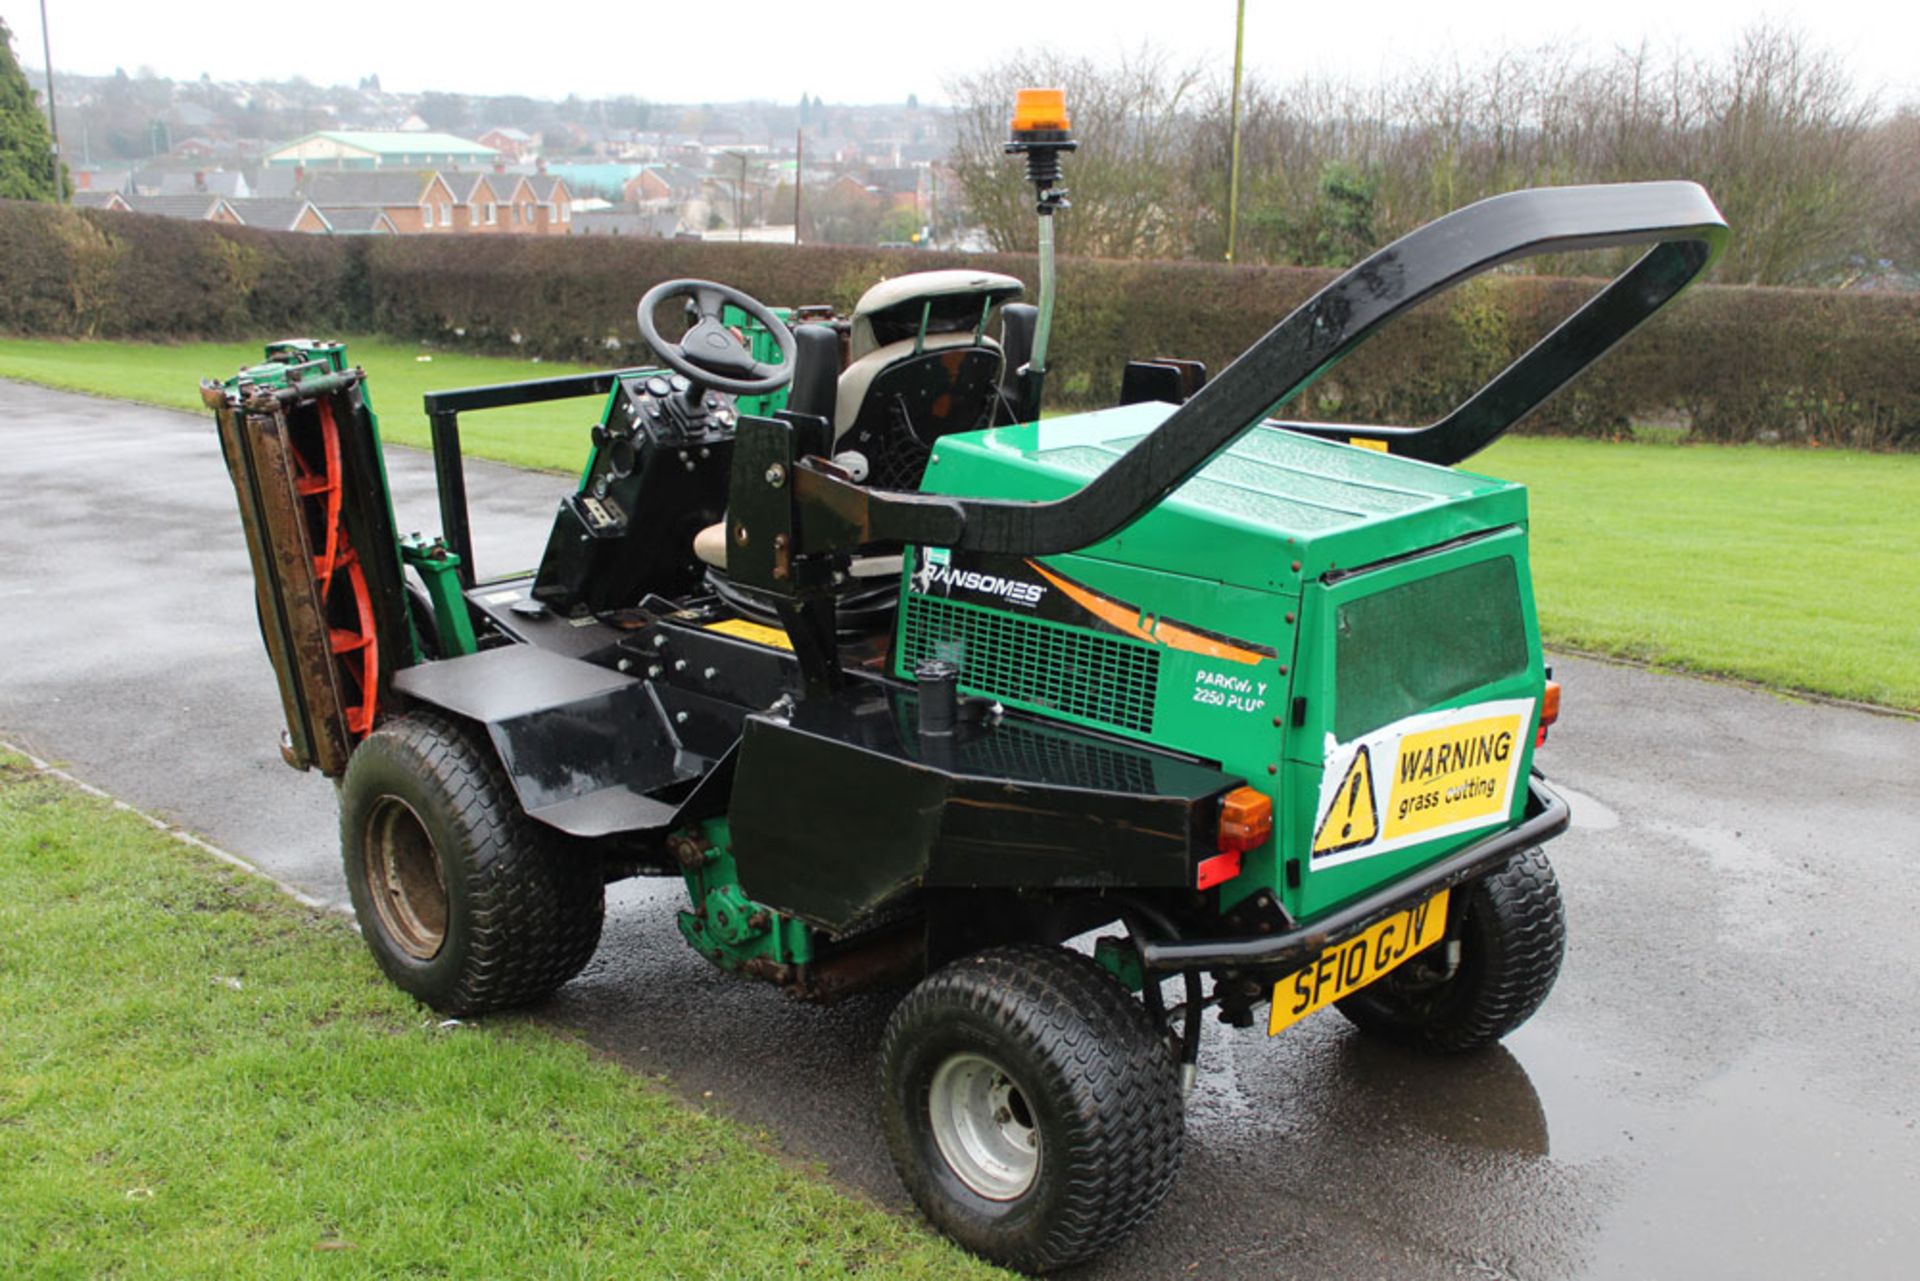 2010 Ransomes Parkway 2250 Plus Ride On Cylinder Mower - Image 2 of 2